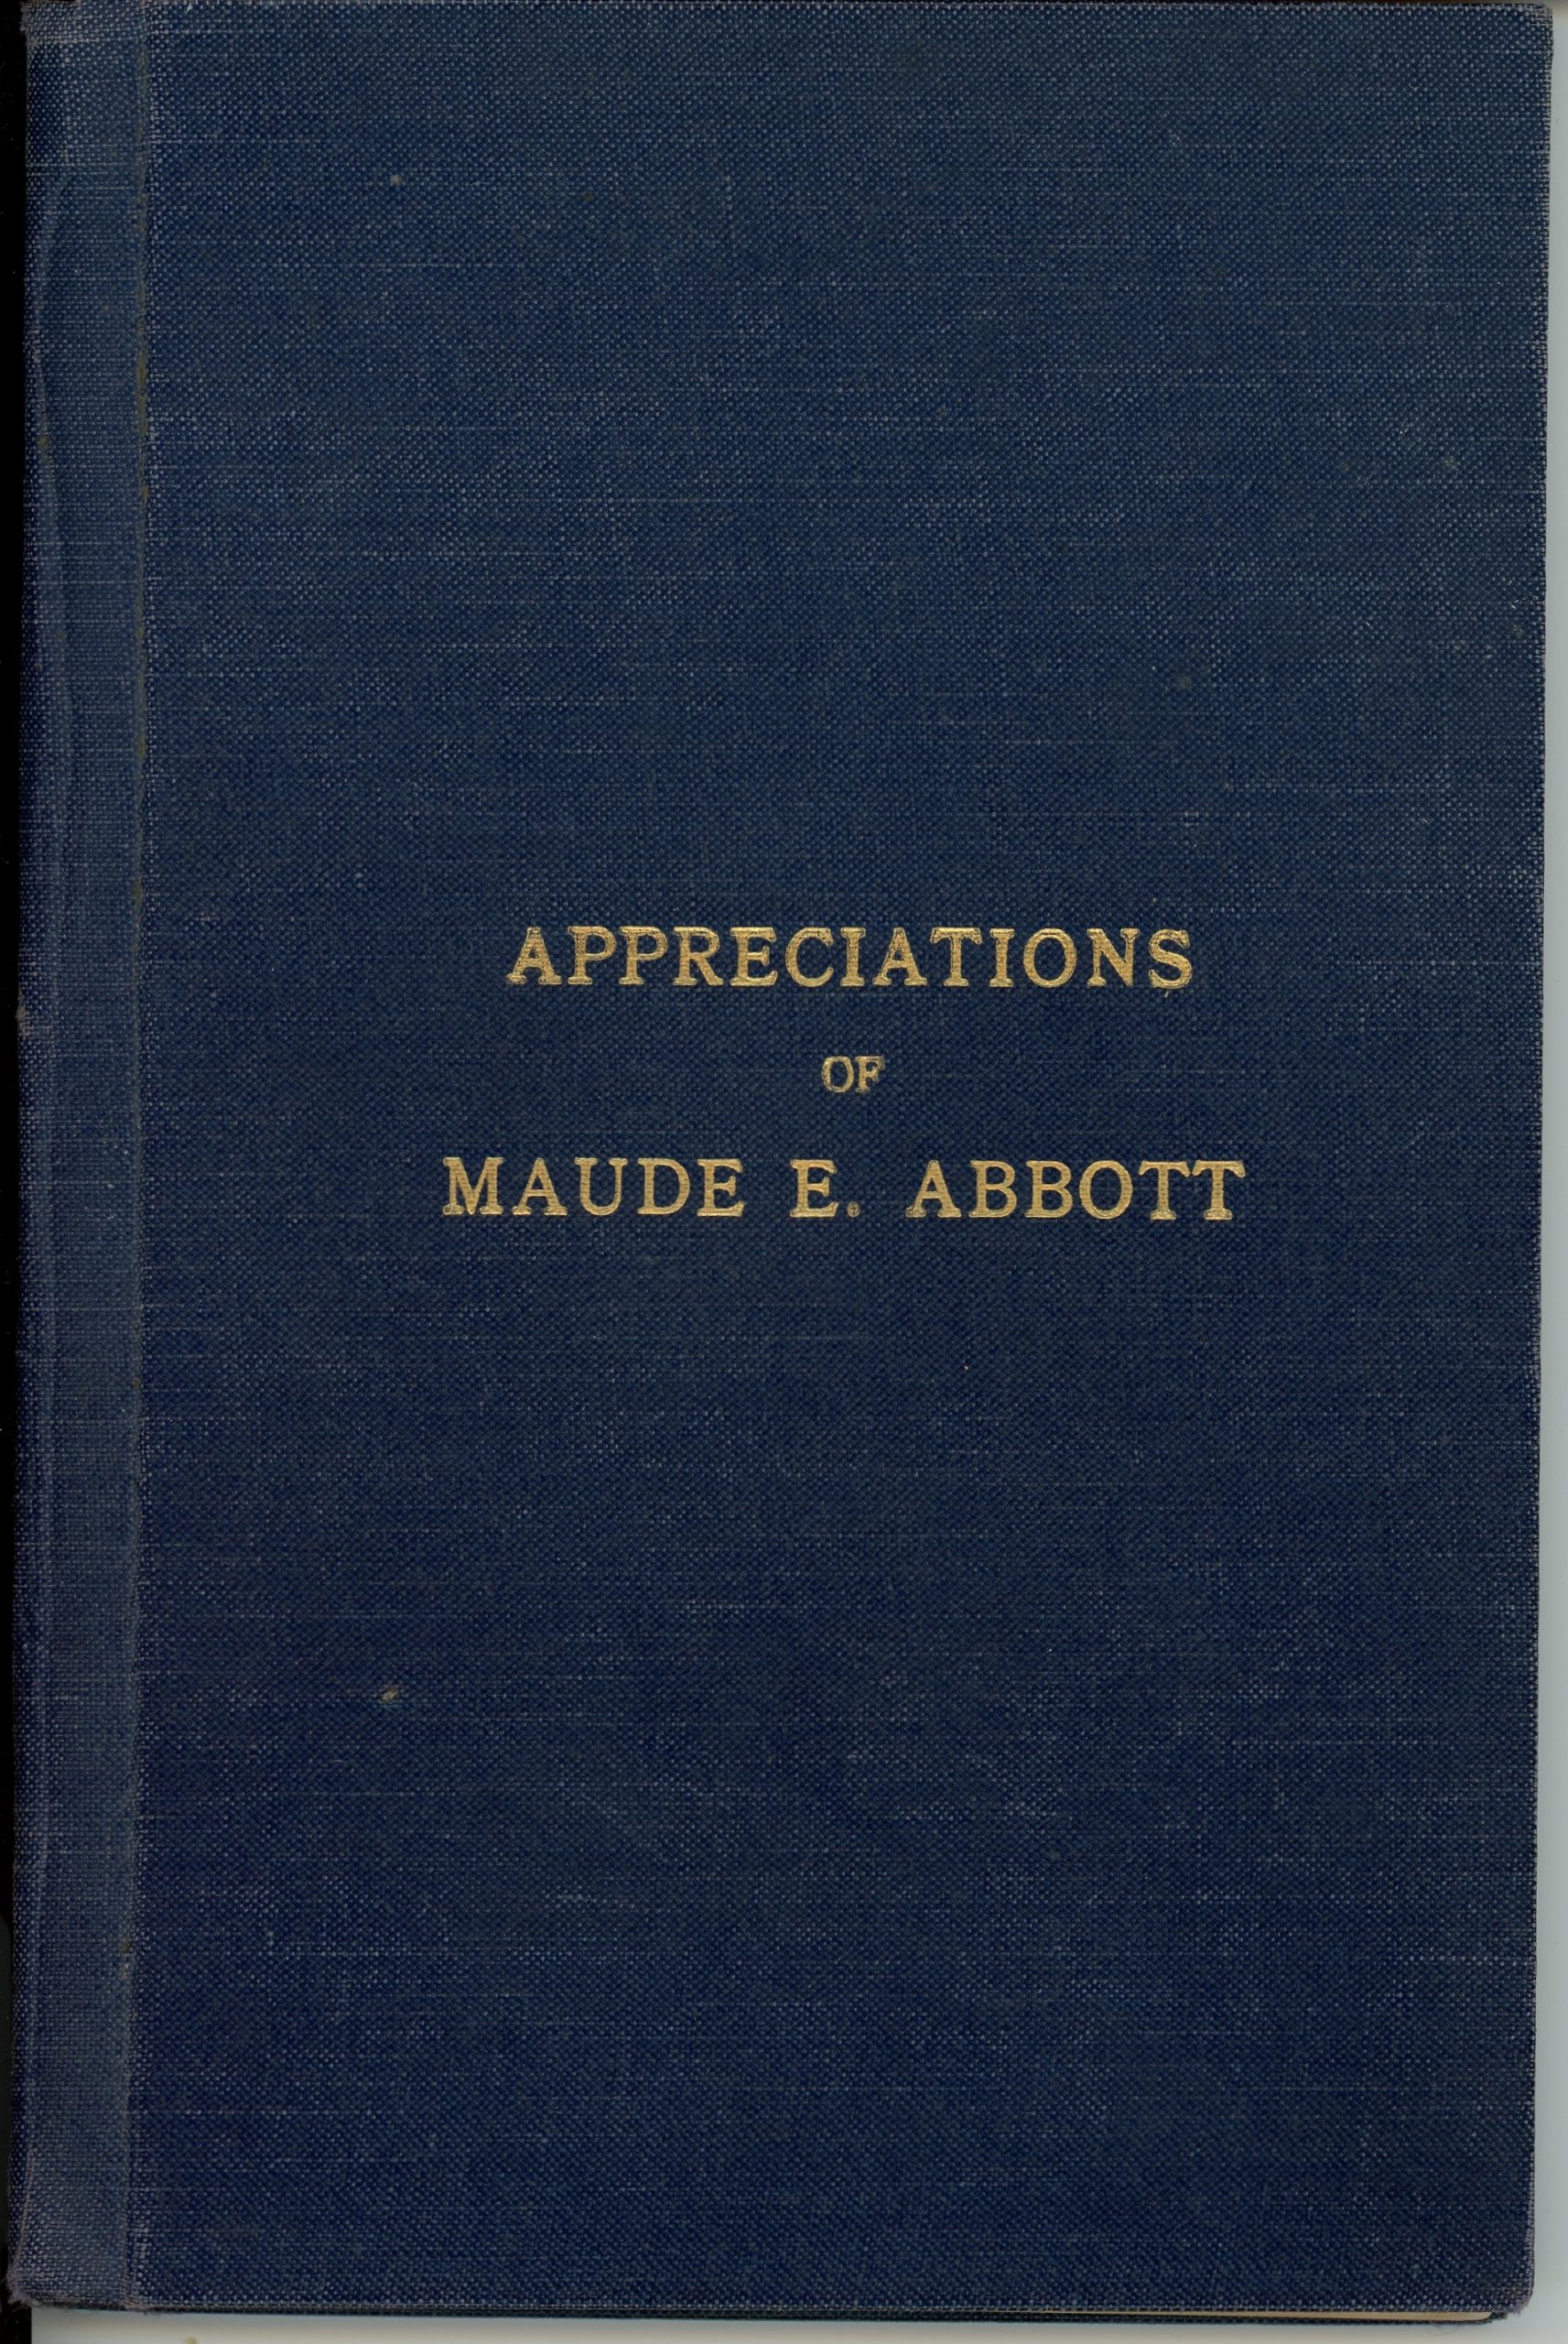 Cover of a dark blue book bearing the inscription “Appreciations of Maude E. Abbott” in the centre, in gold lettering.